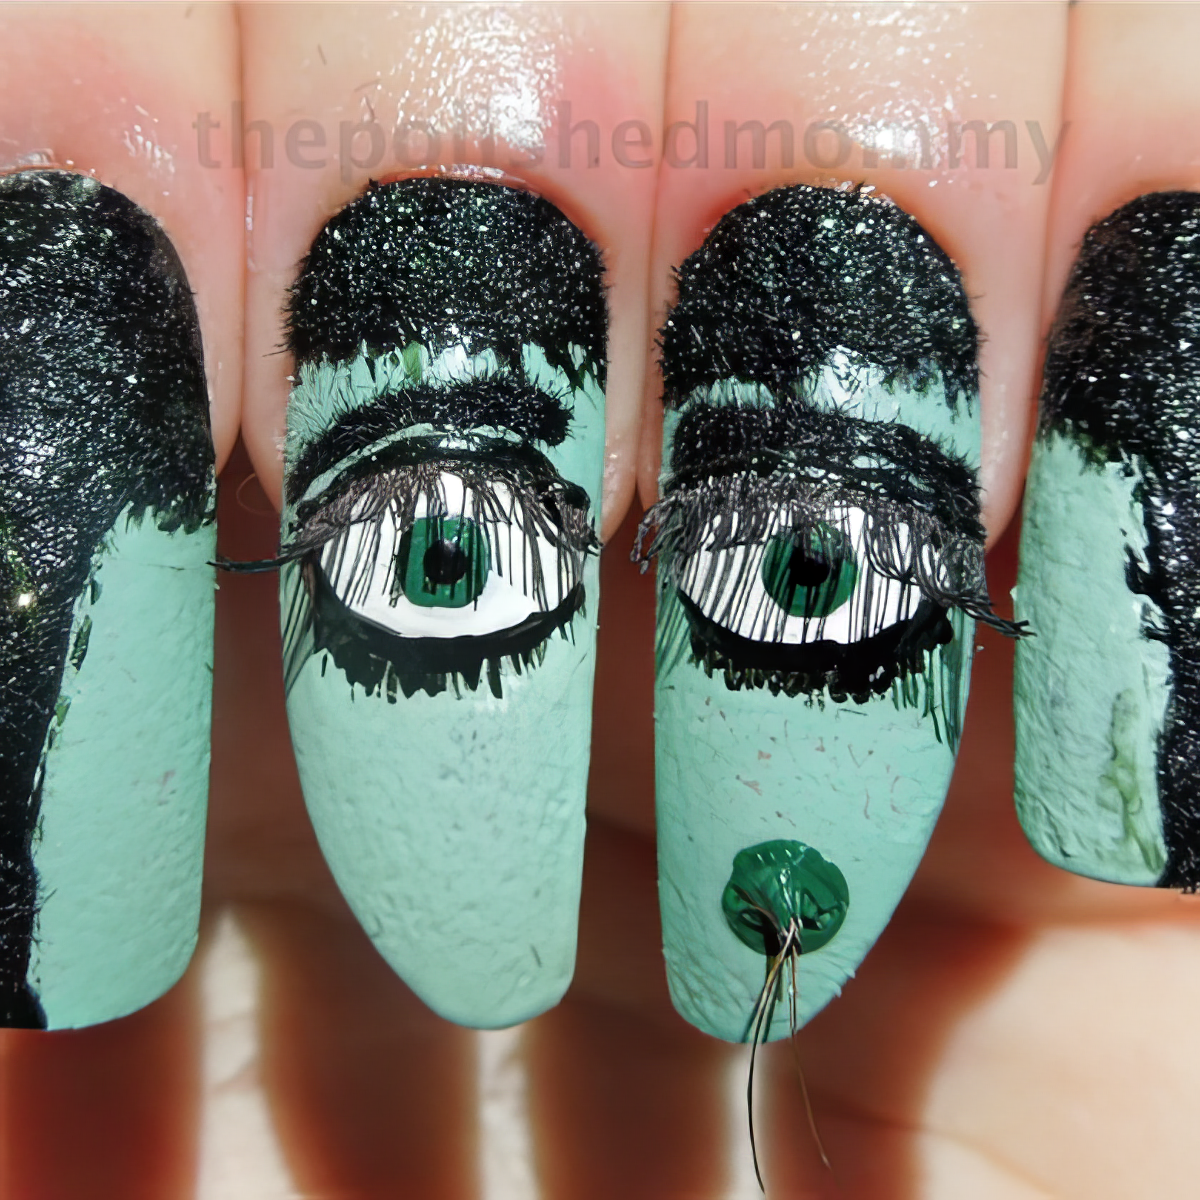 Have witchy nails this Halloween!